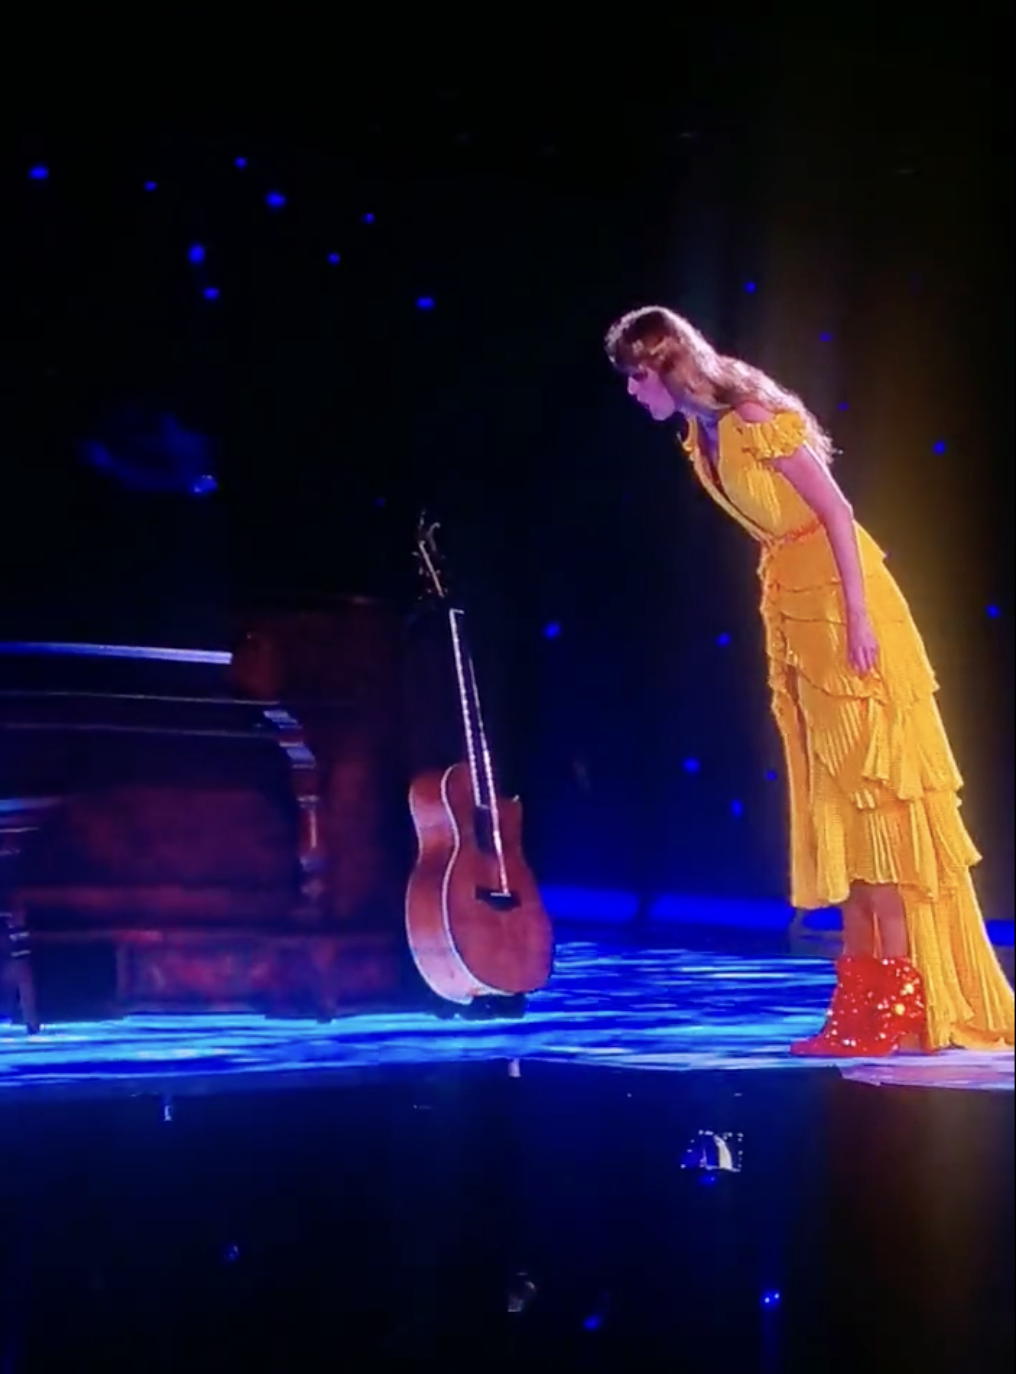 Taylor onstage looking down